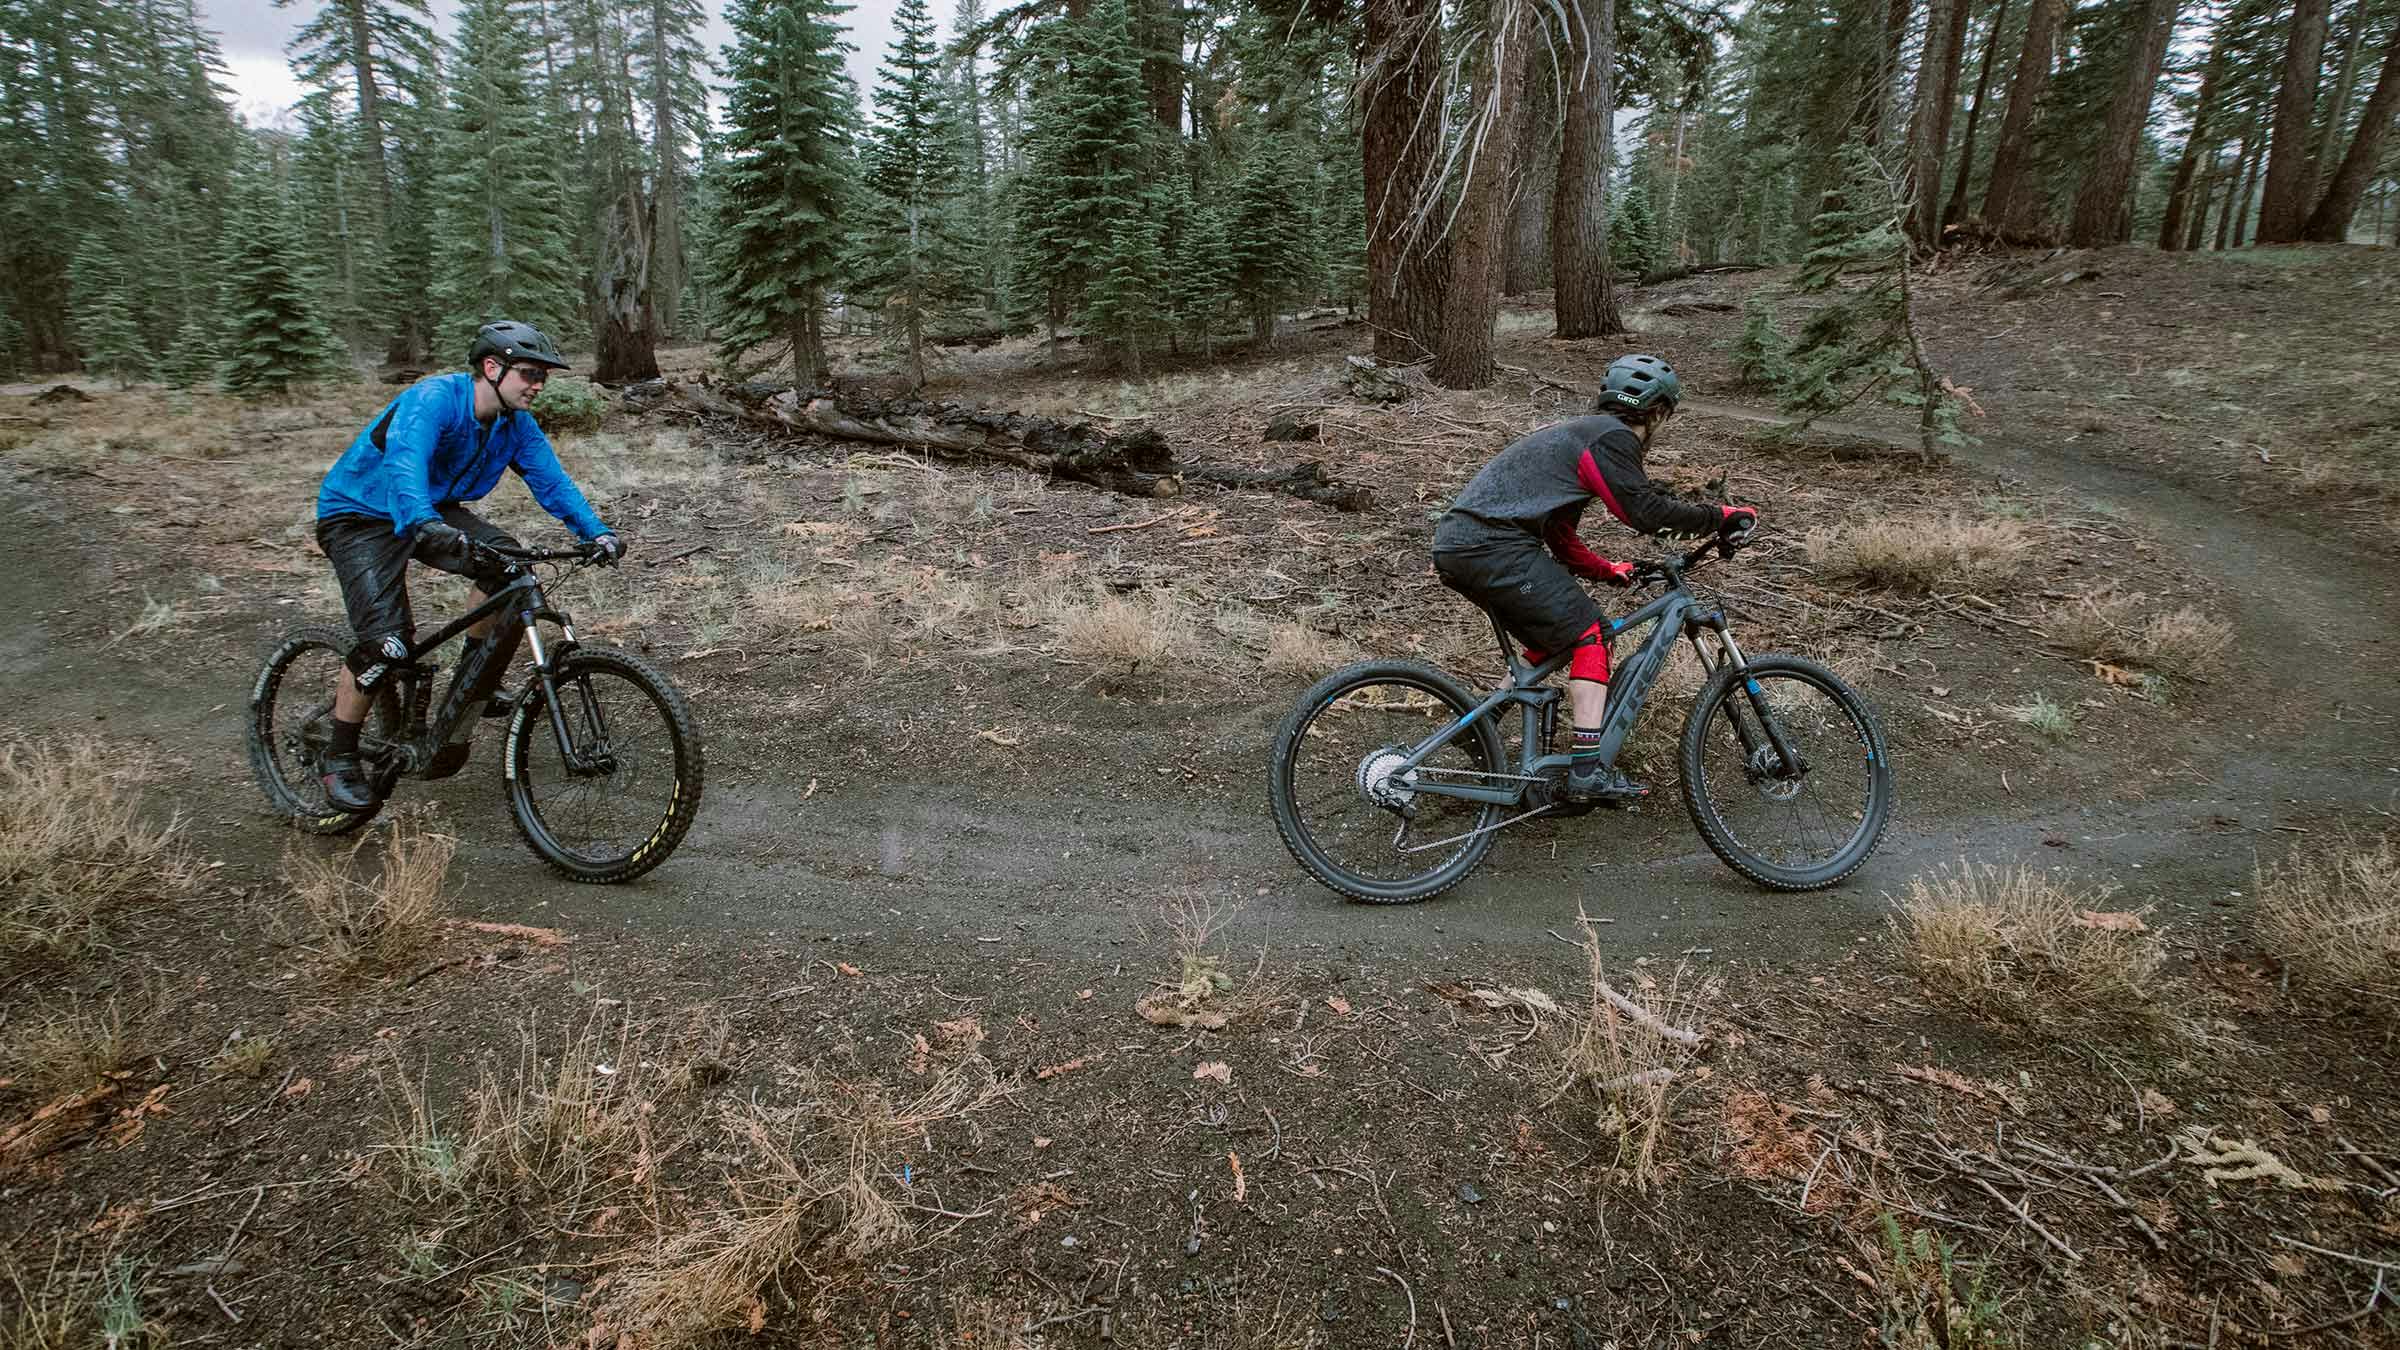 Two mountain bikers on ebikes